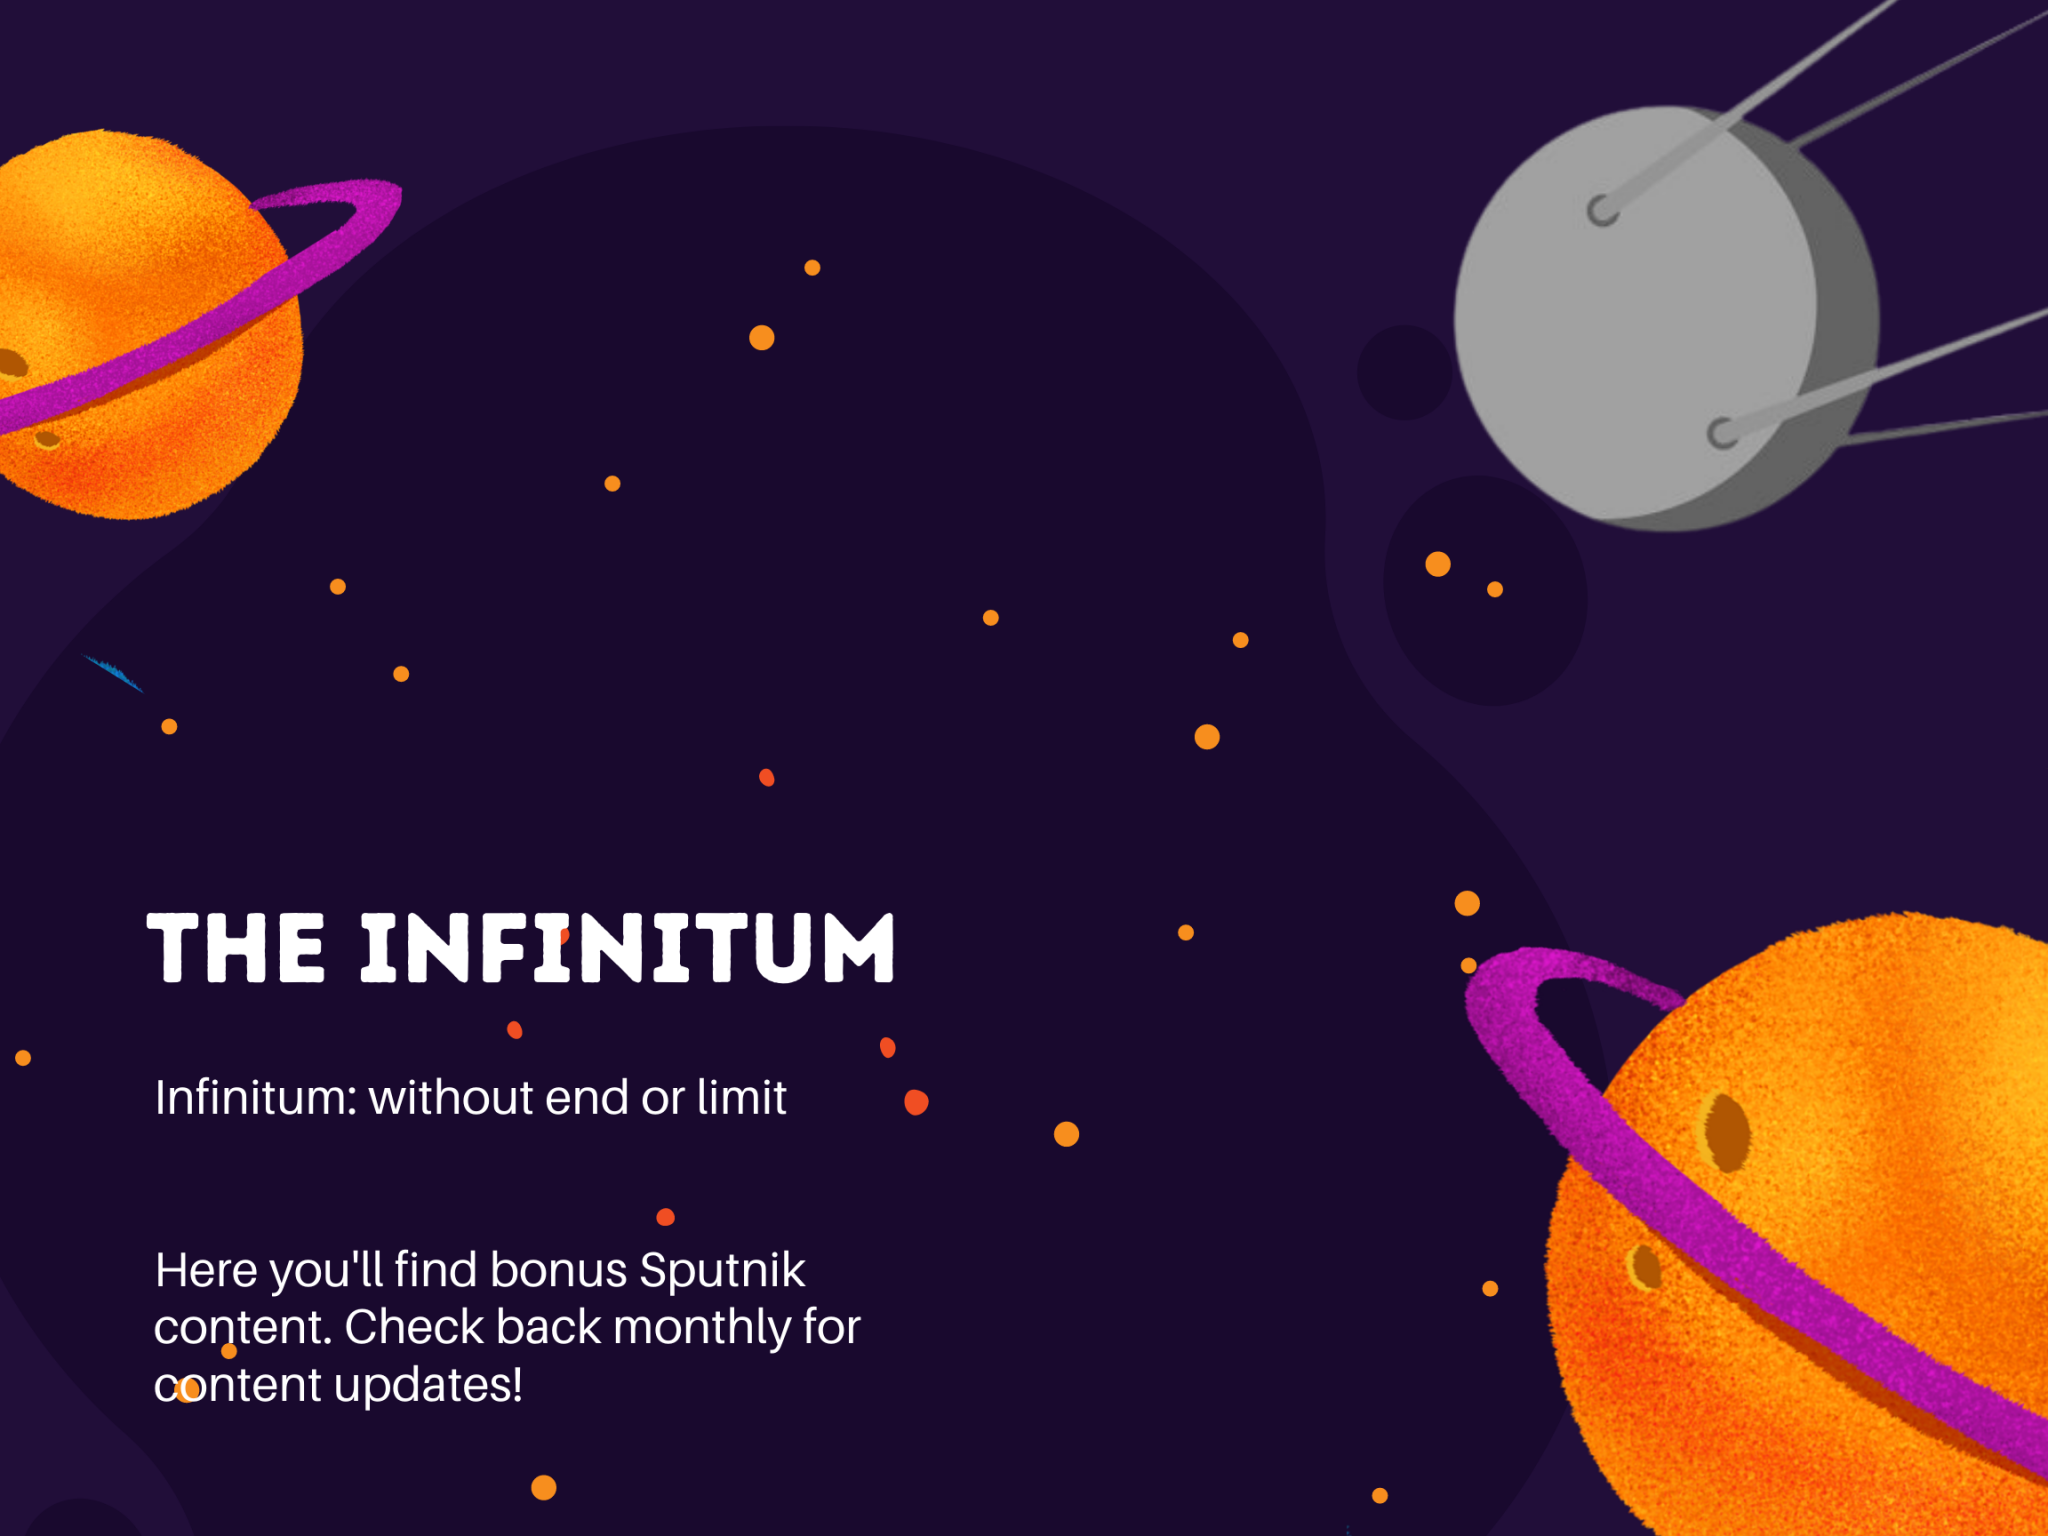 The Infinitum: nfinitum: without end or limit Here you'll find bonus Sputnik content. Check back monthly for content updates!